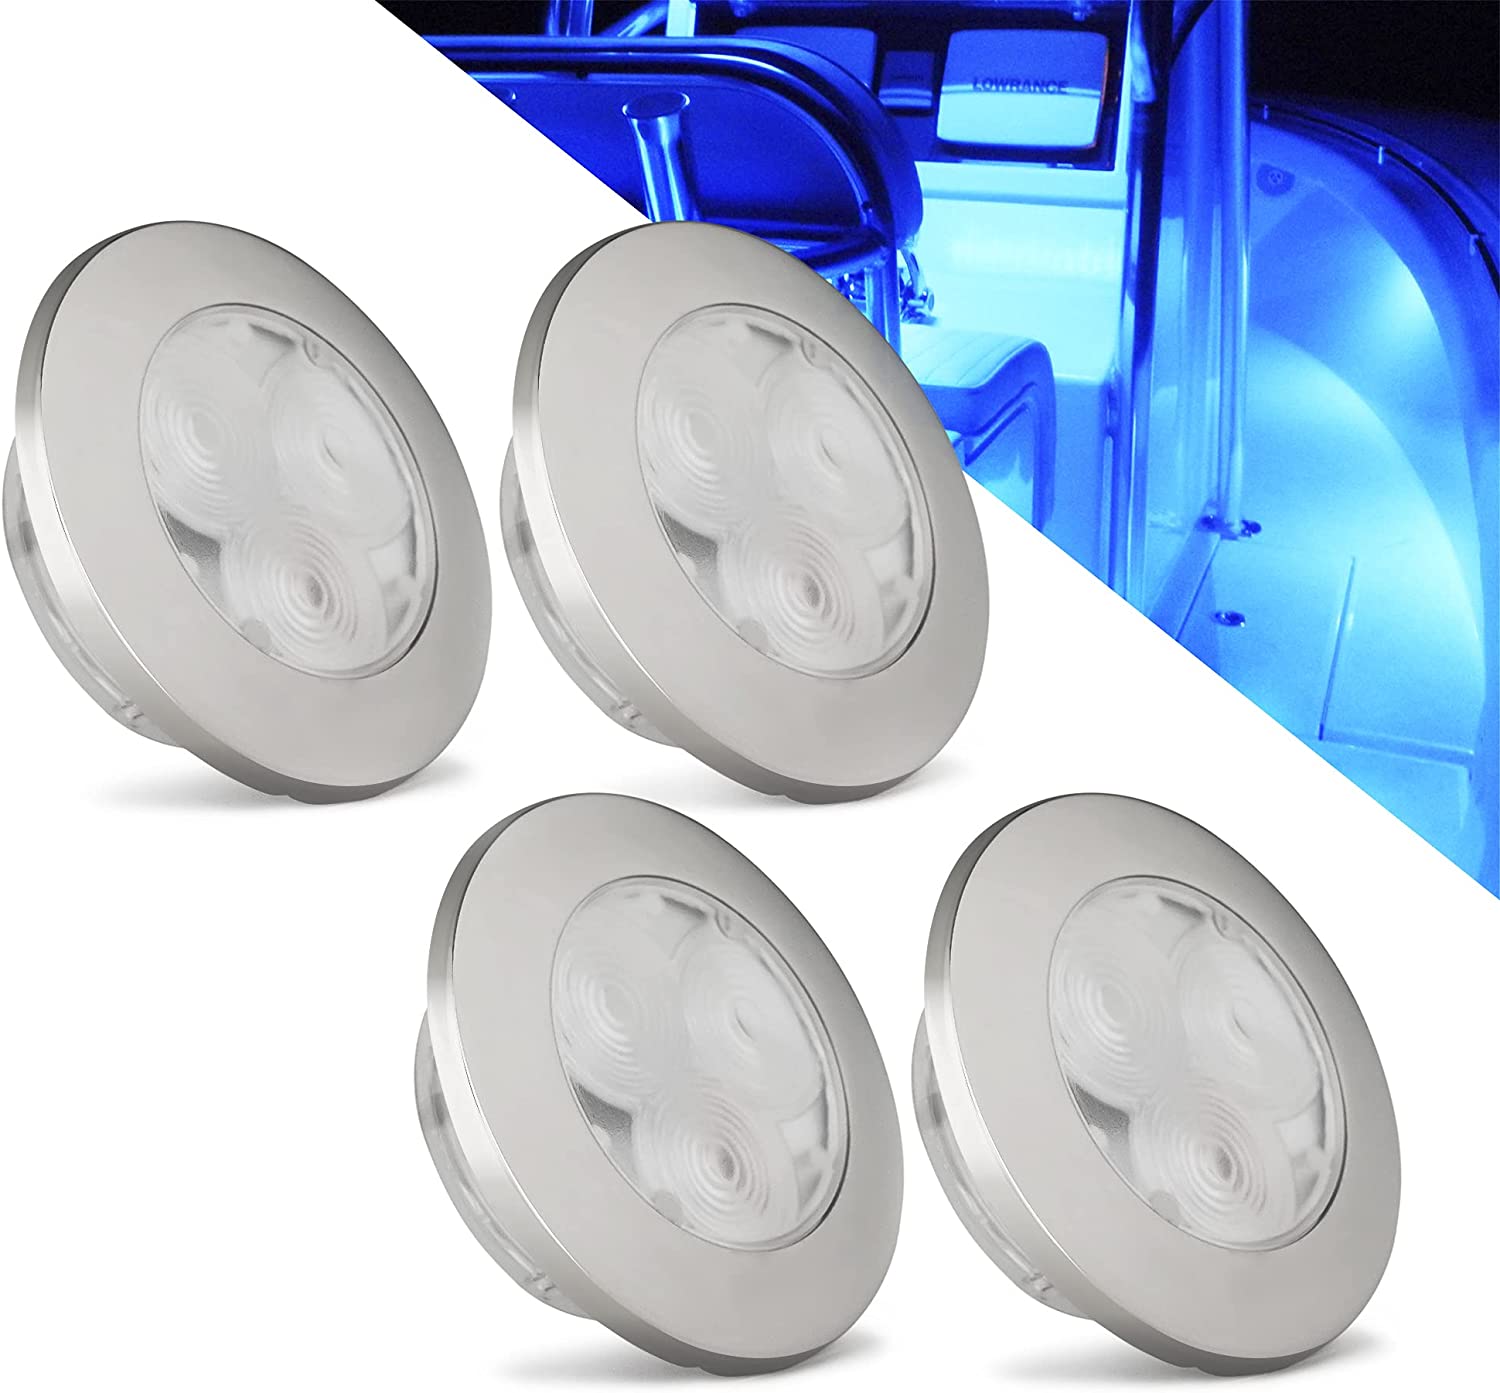 4-Pack: Round Blue LED Flush Mount Ceiling Light, ABS Plastic with AISI304 Stainless Steel Rim, 12-24 volts, Marine, Boat, RV, Motorhome